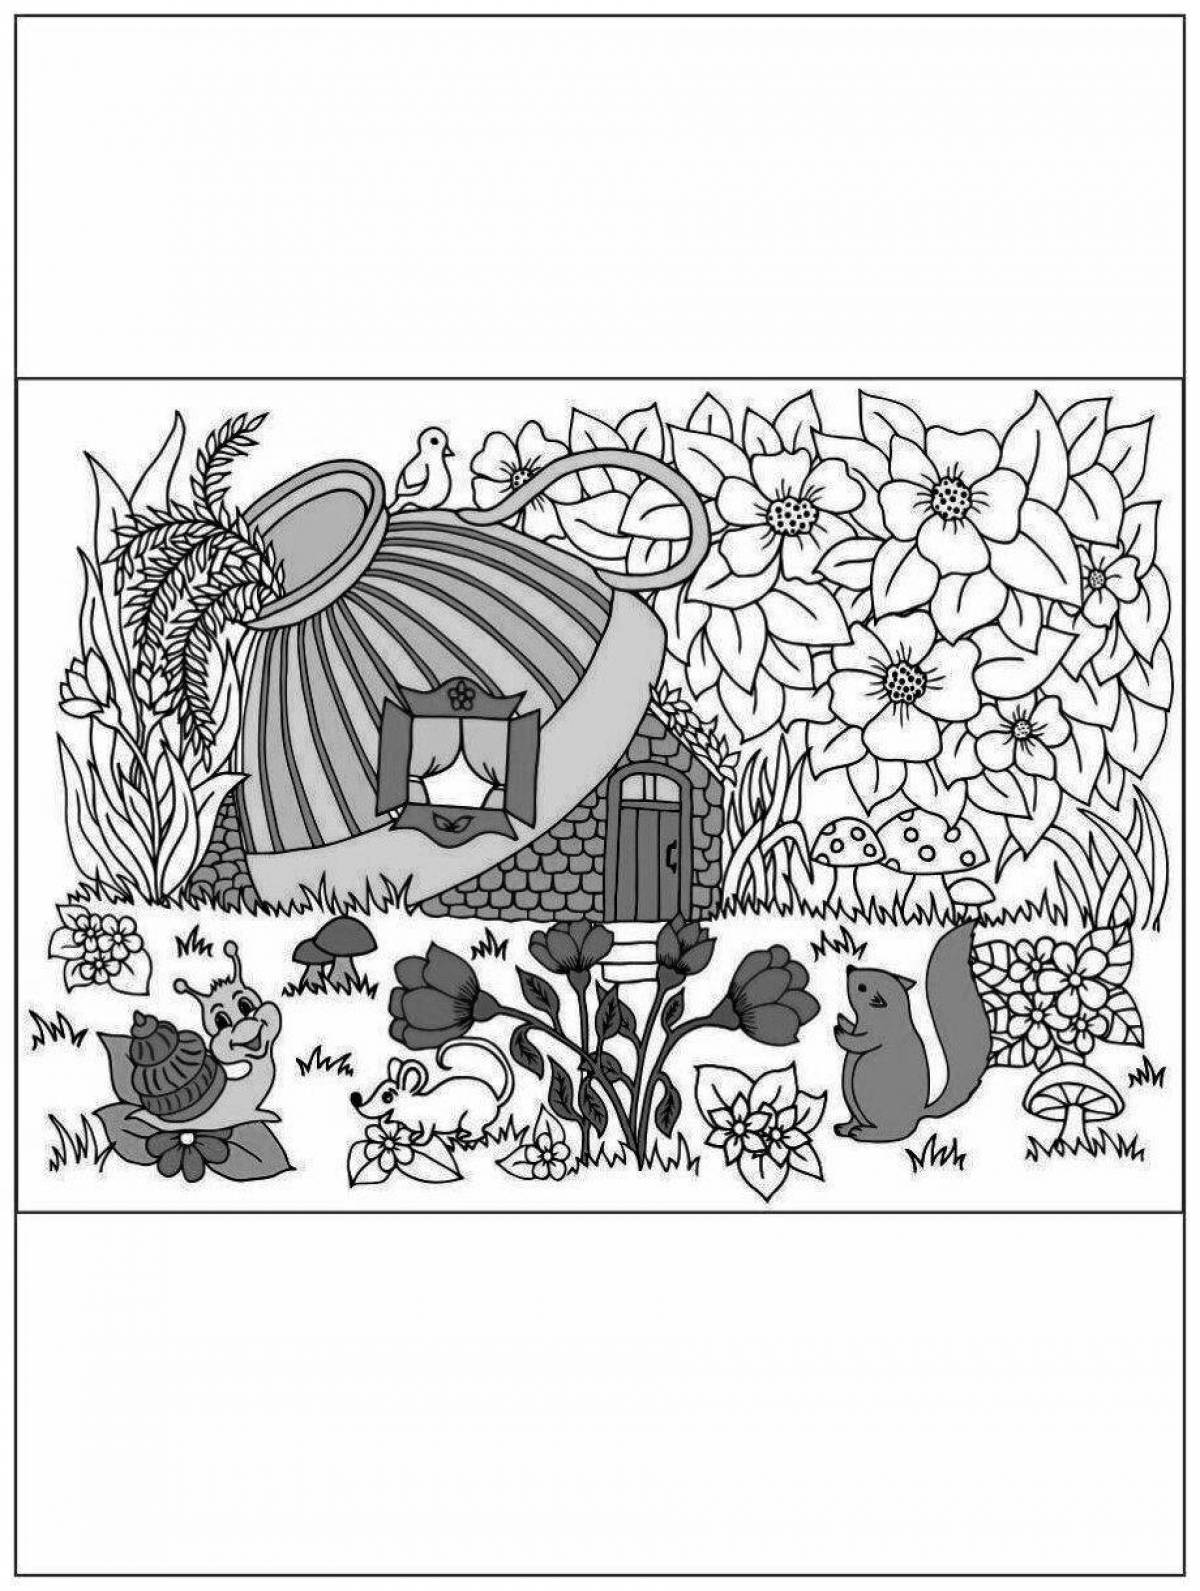 Color-lush hobbyline coloring page